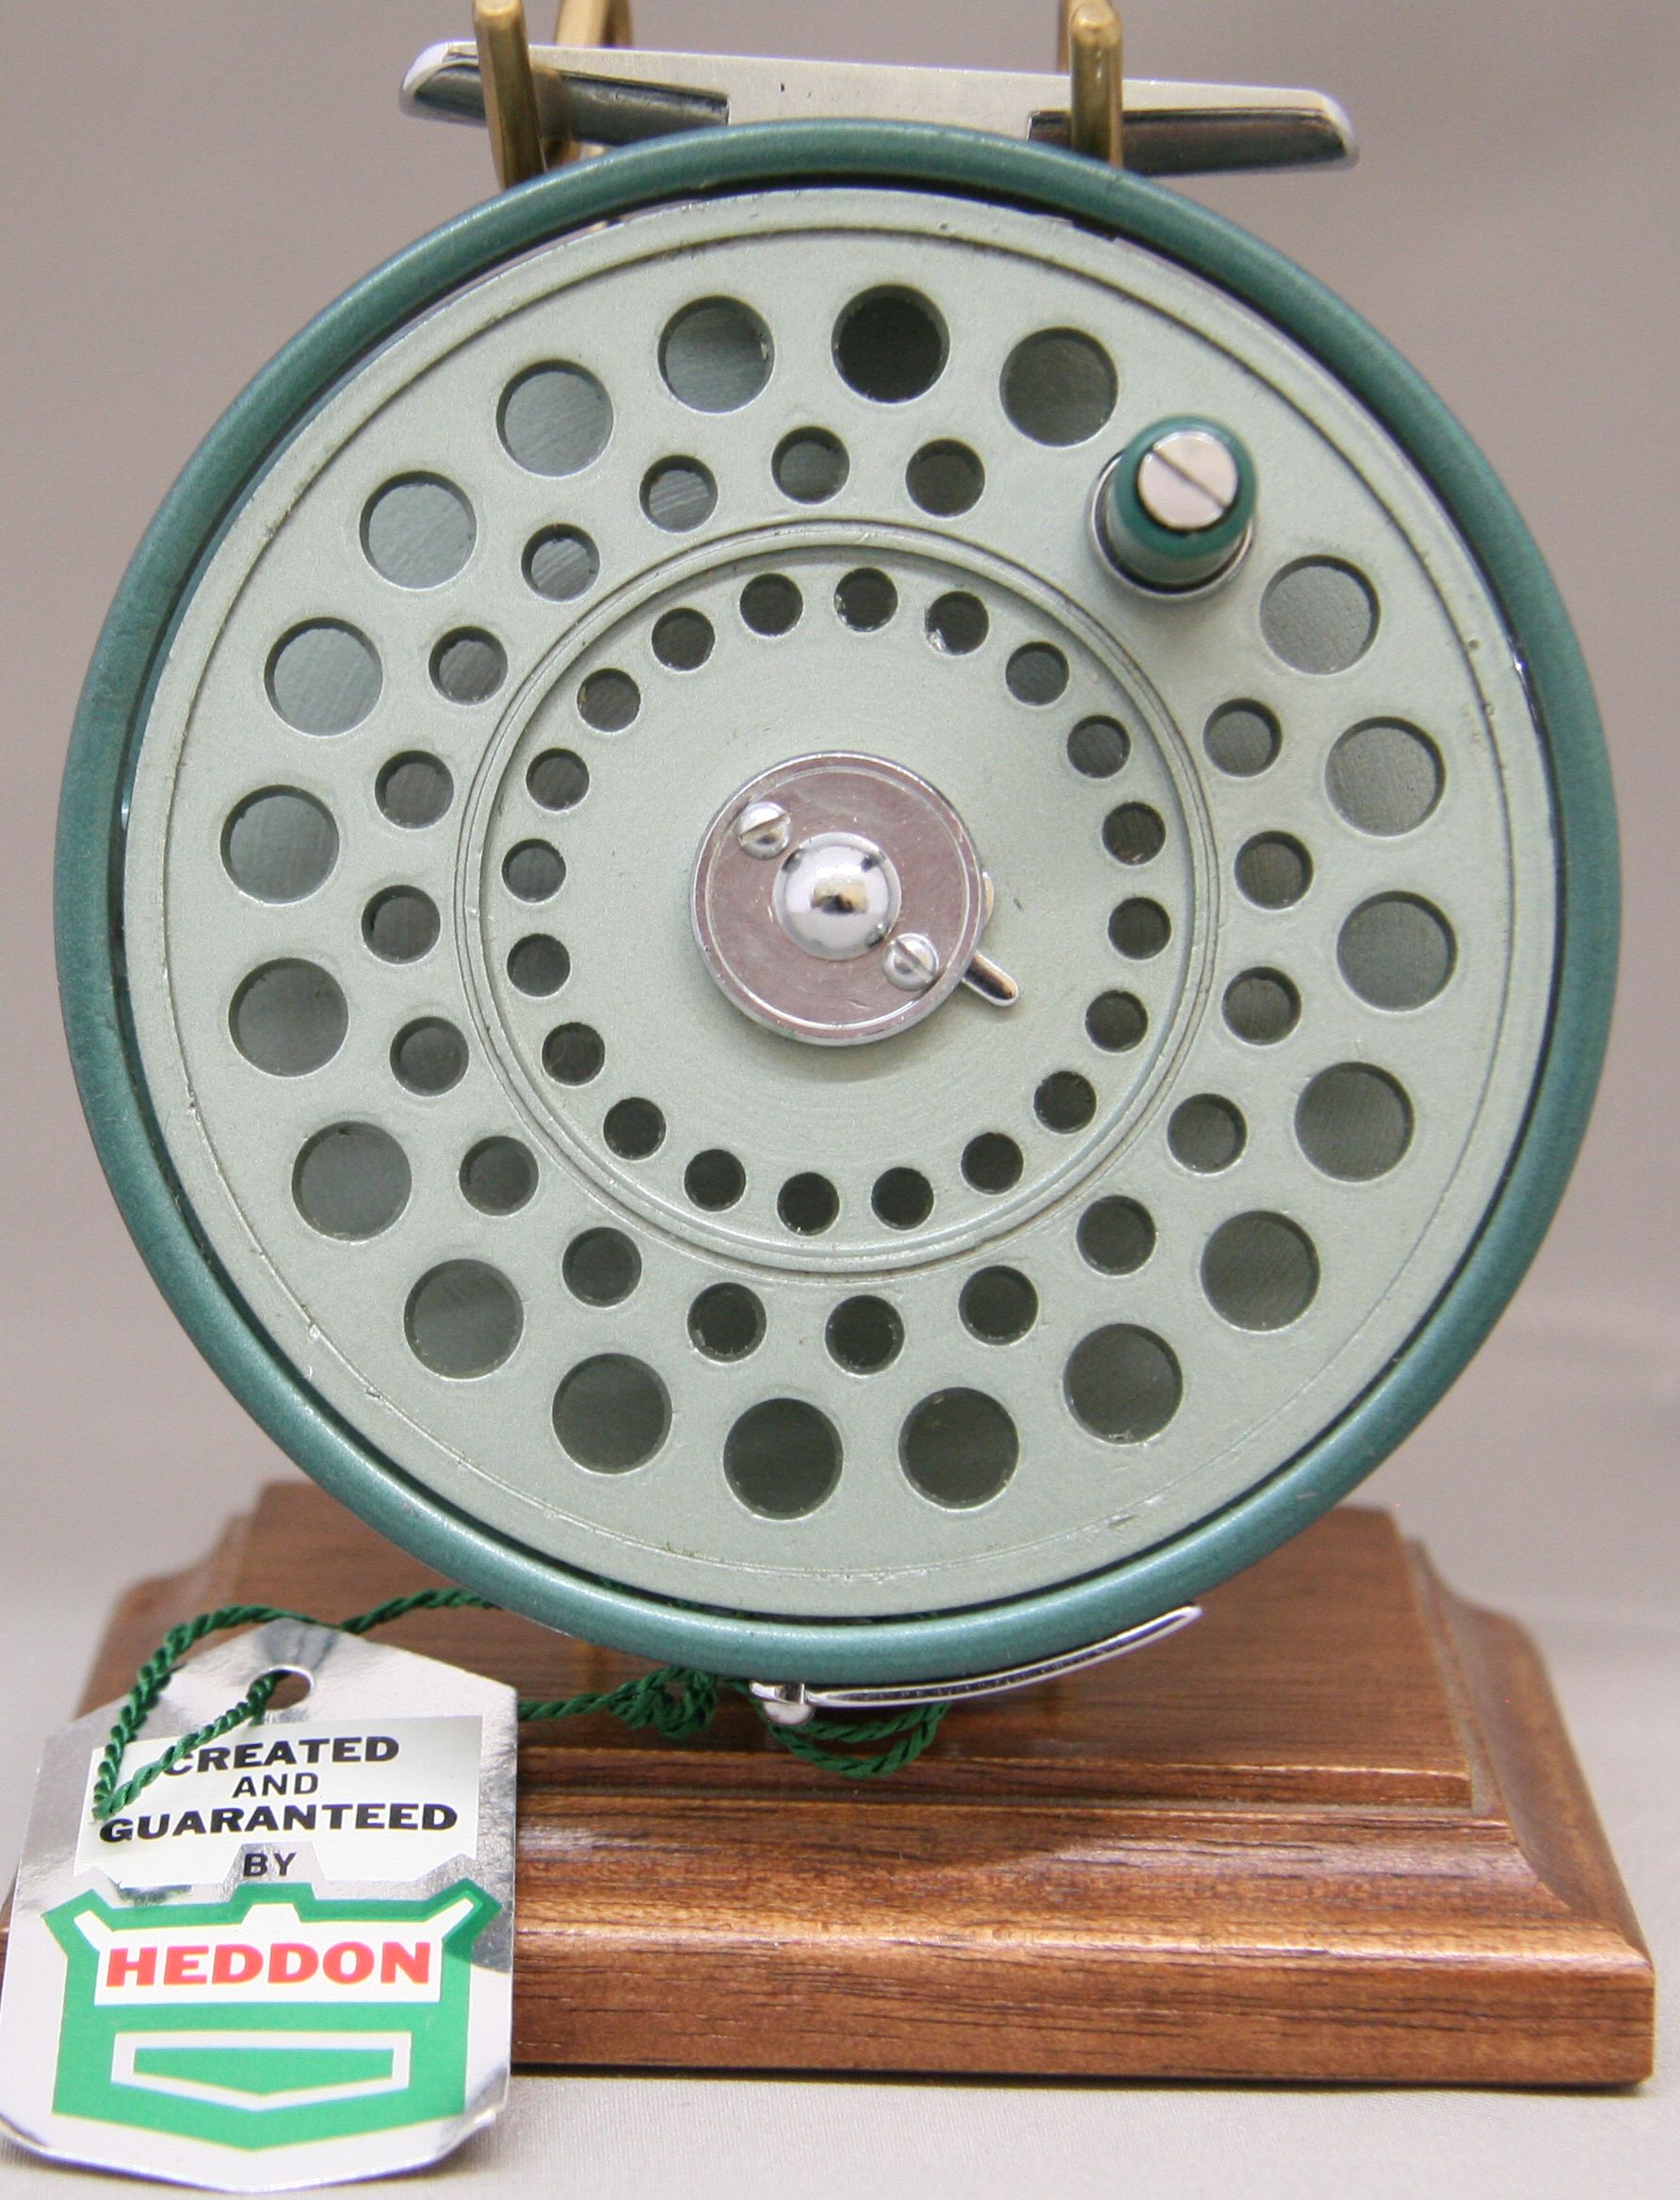 First Cast Fly Fishing: Vintage Fly Fishing Reels: Keep it or Toss it?